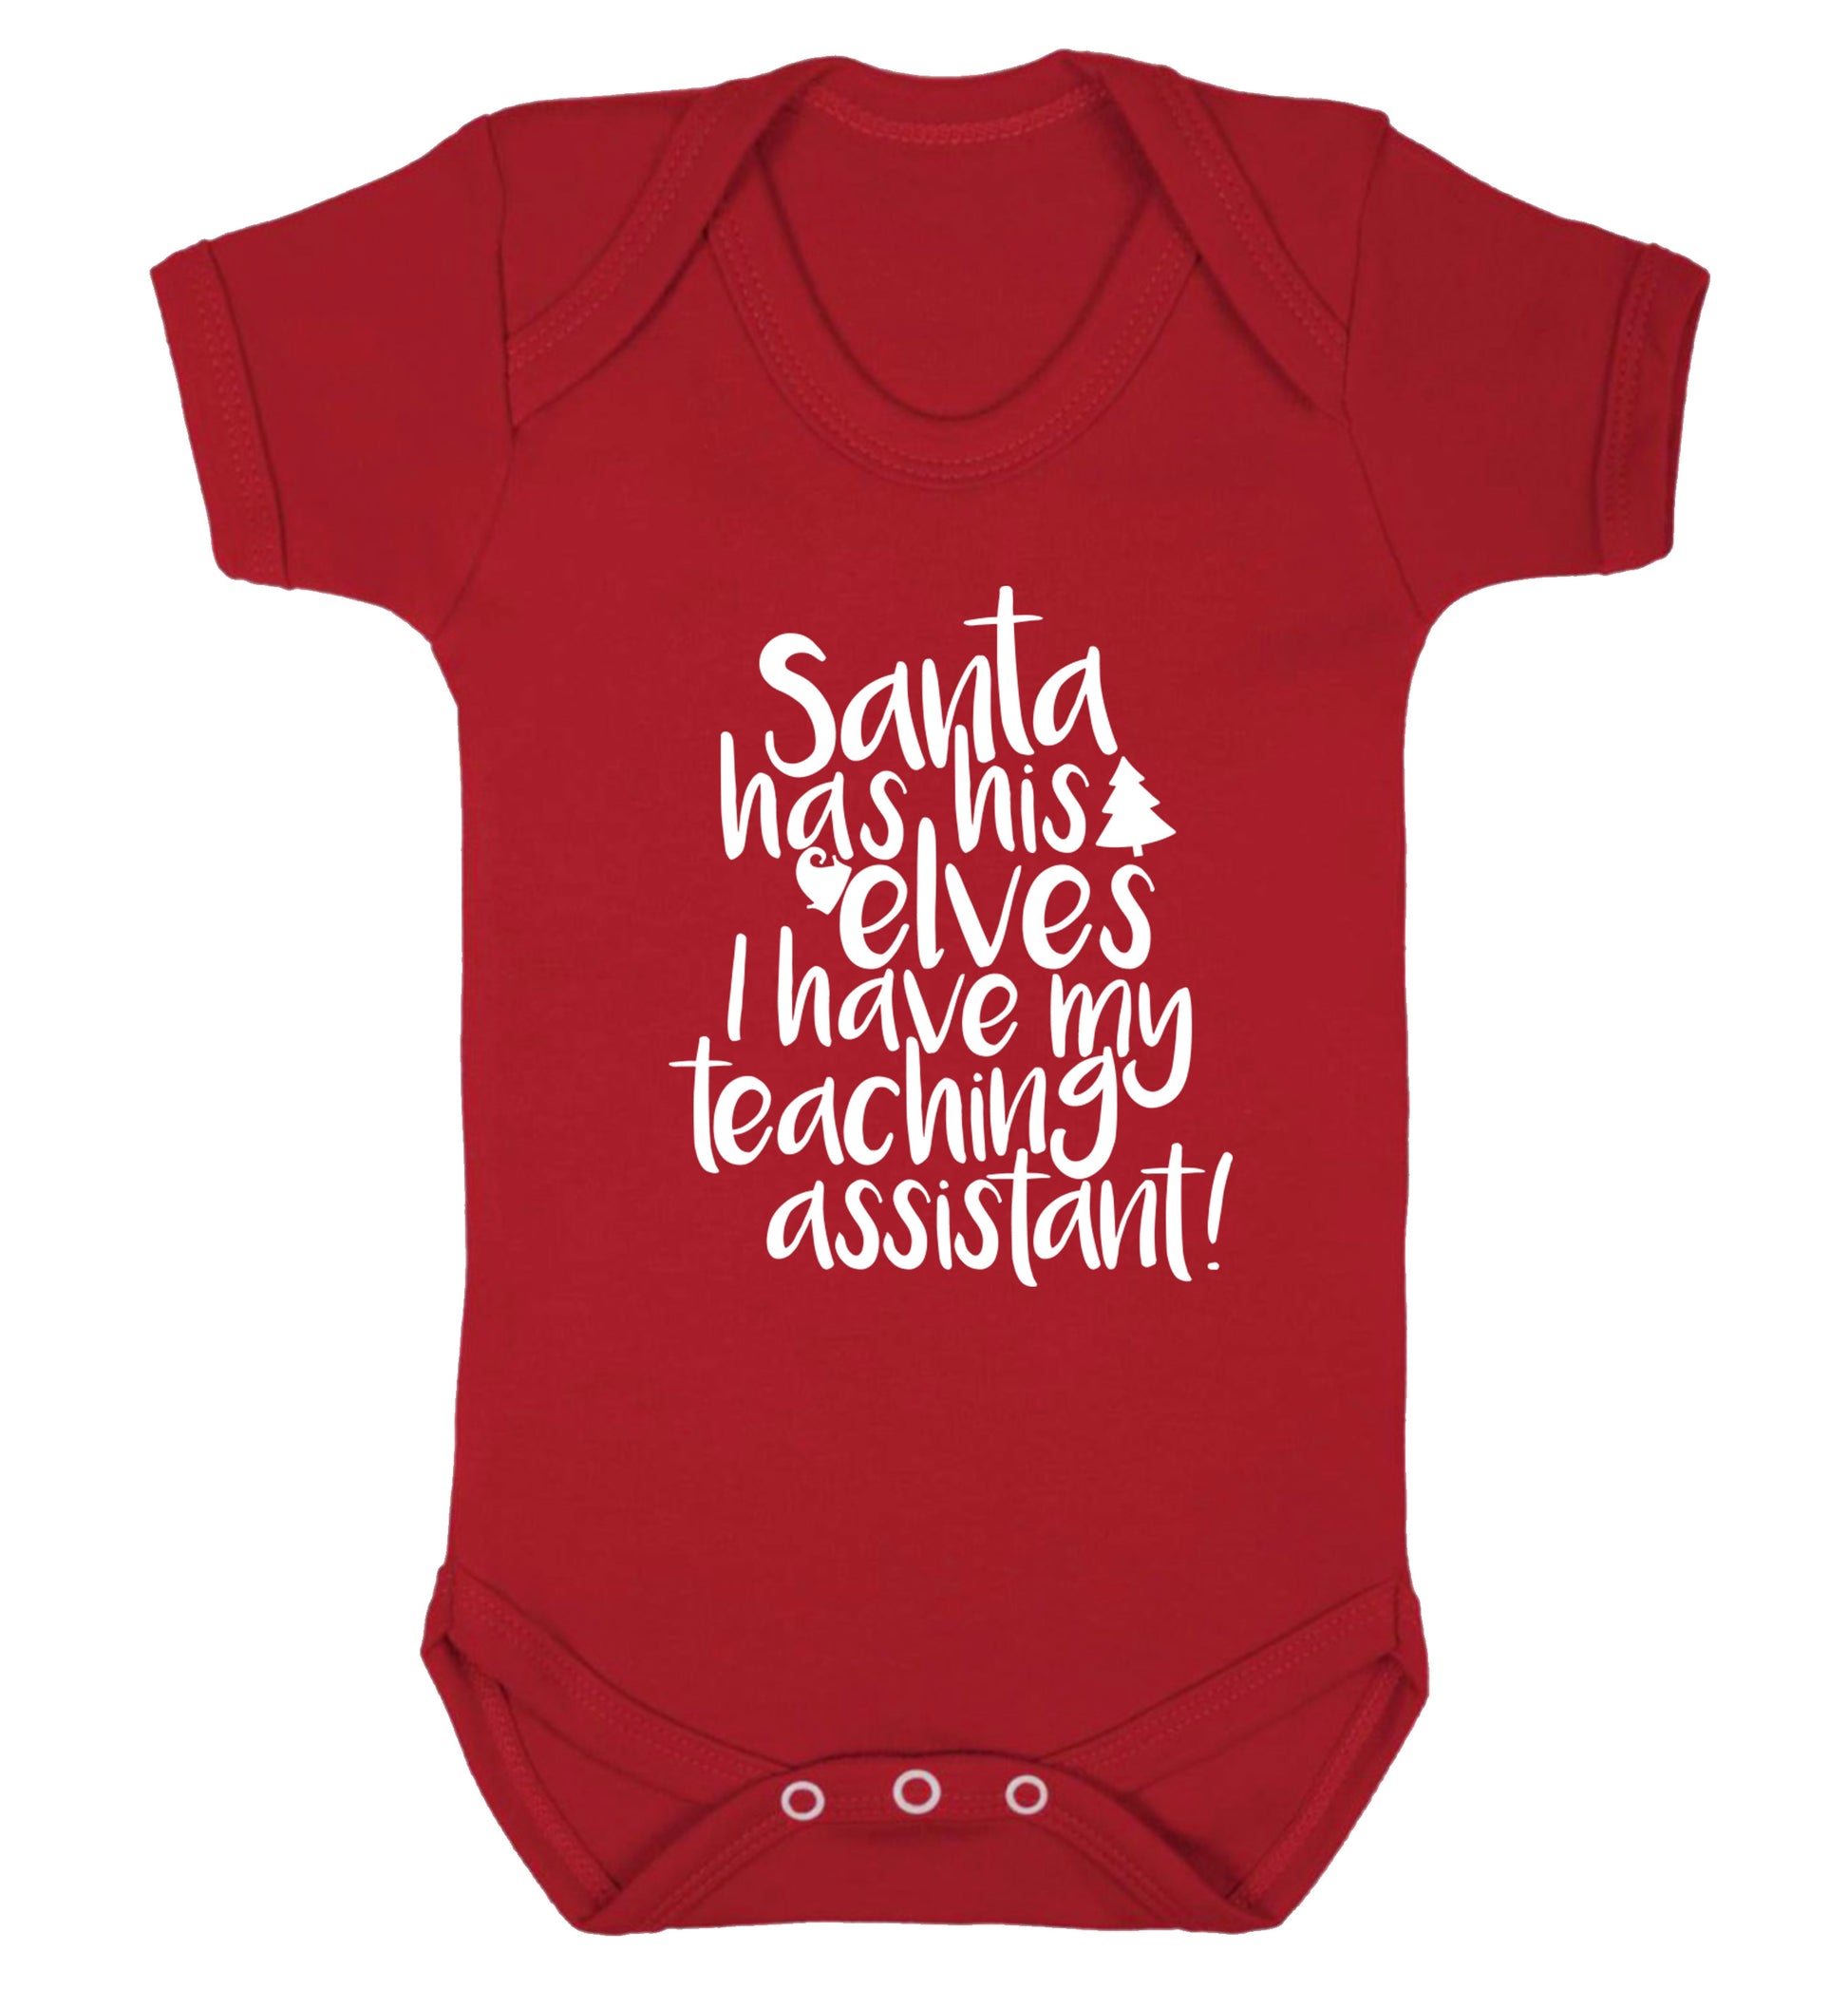 Santa has his elves I have my teaching assistant Baby Vest red 18-24 months